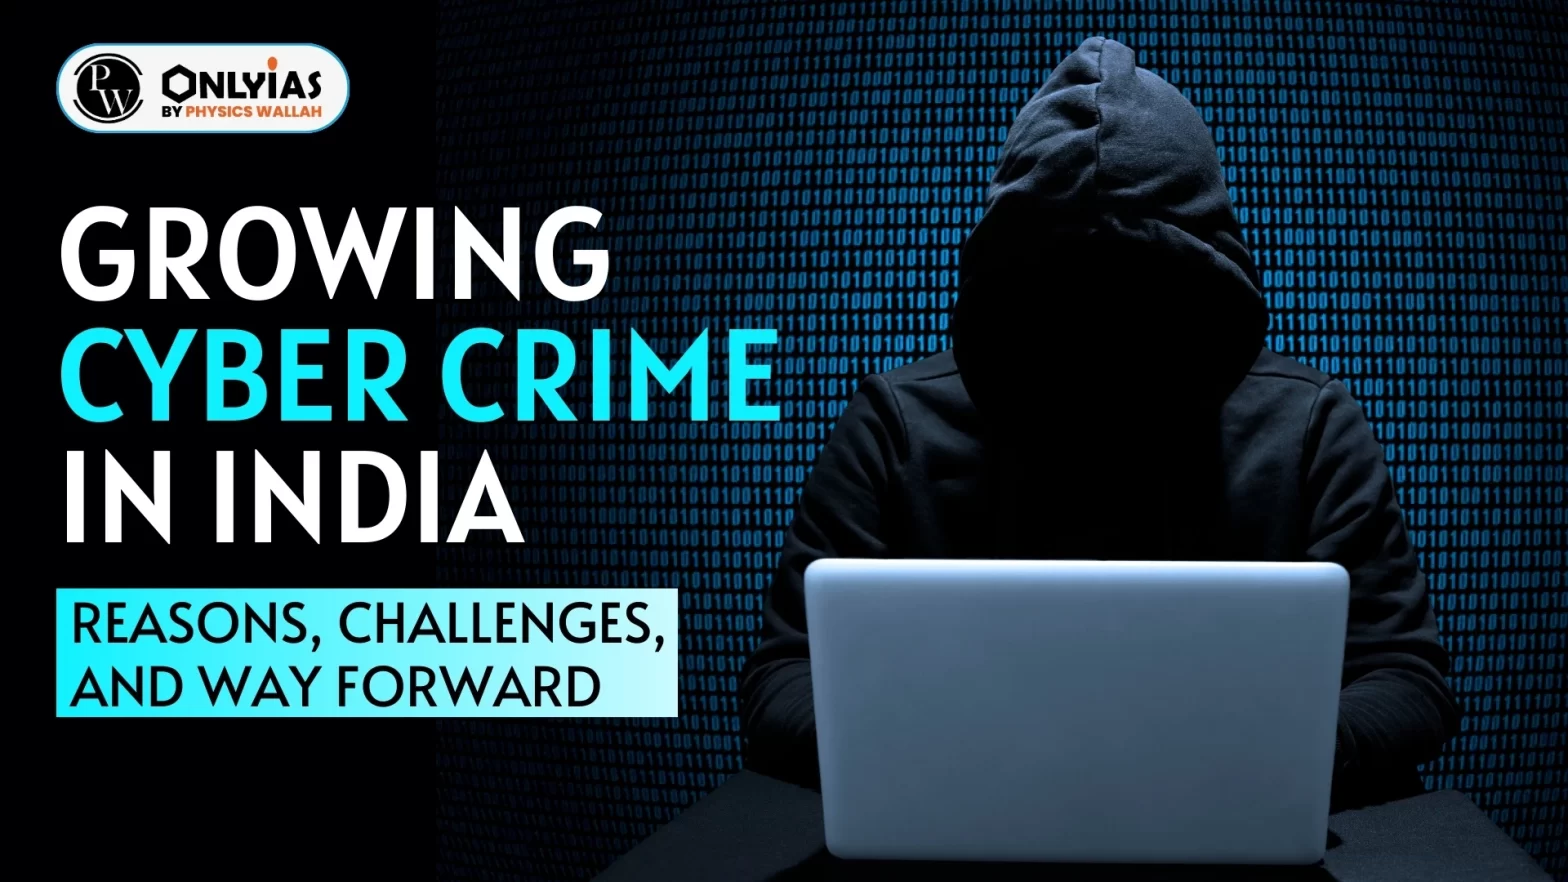 Growing Cyber Crimes in India: Reasons, Challenges, and Way Forward